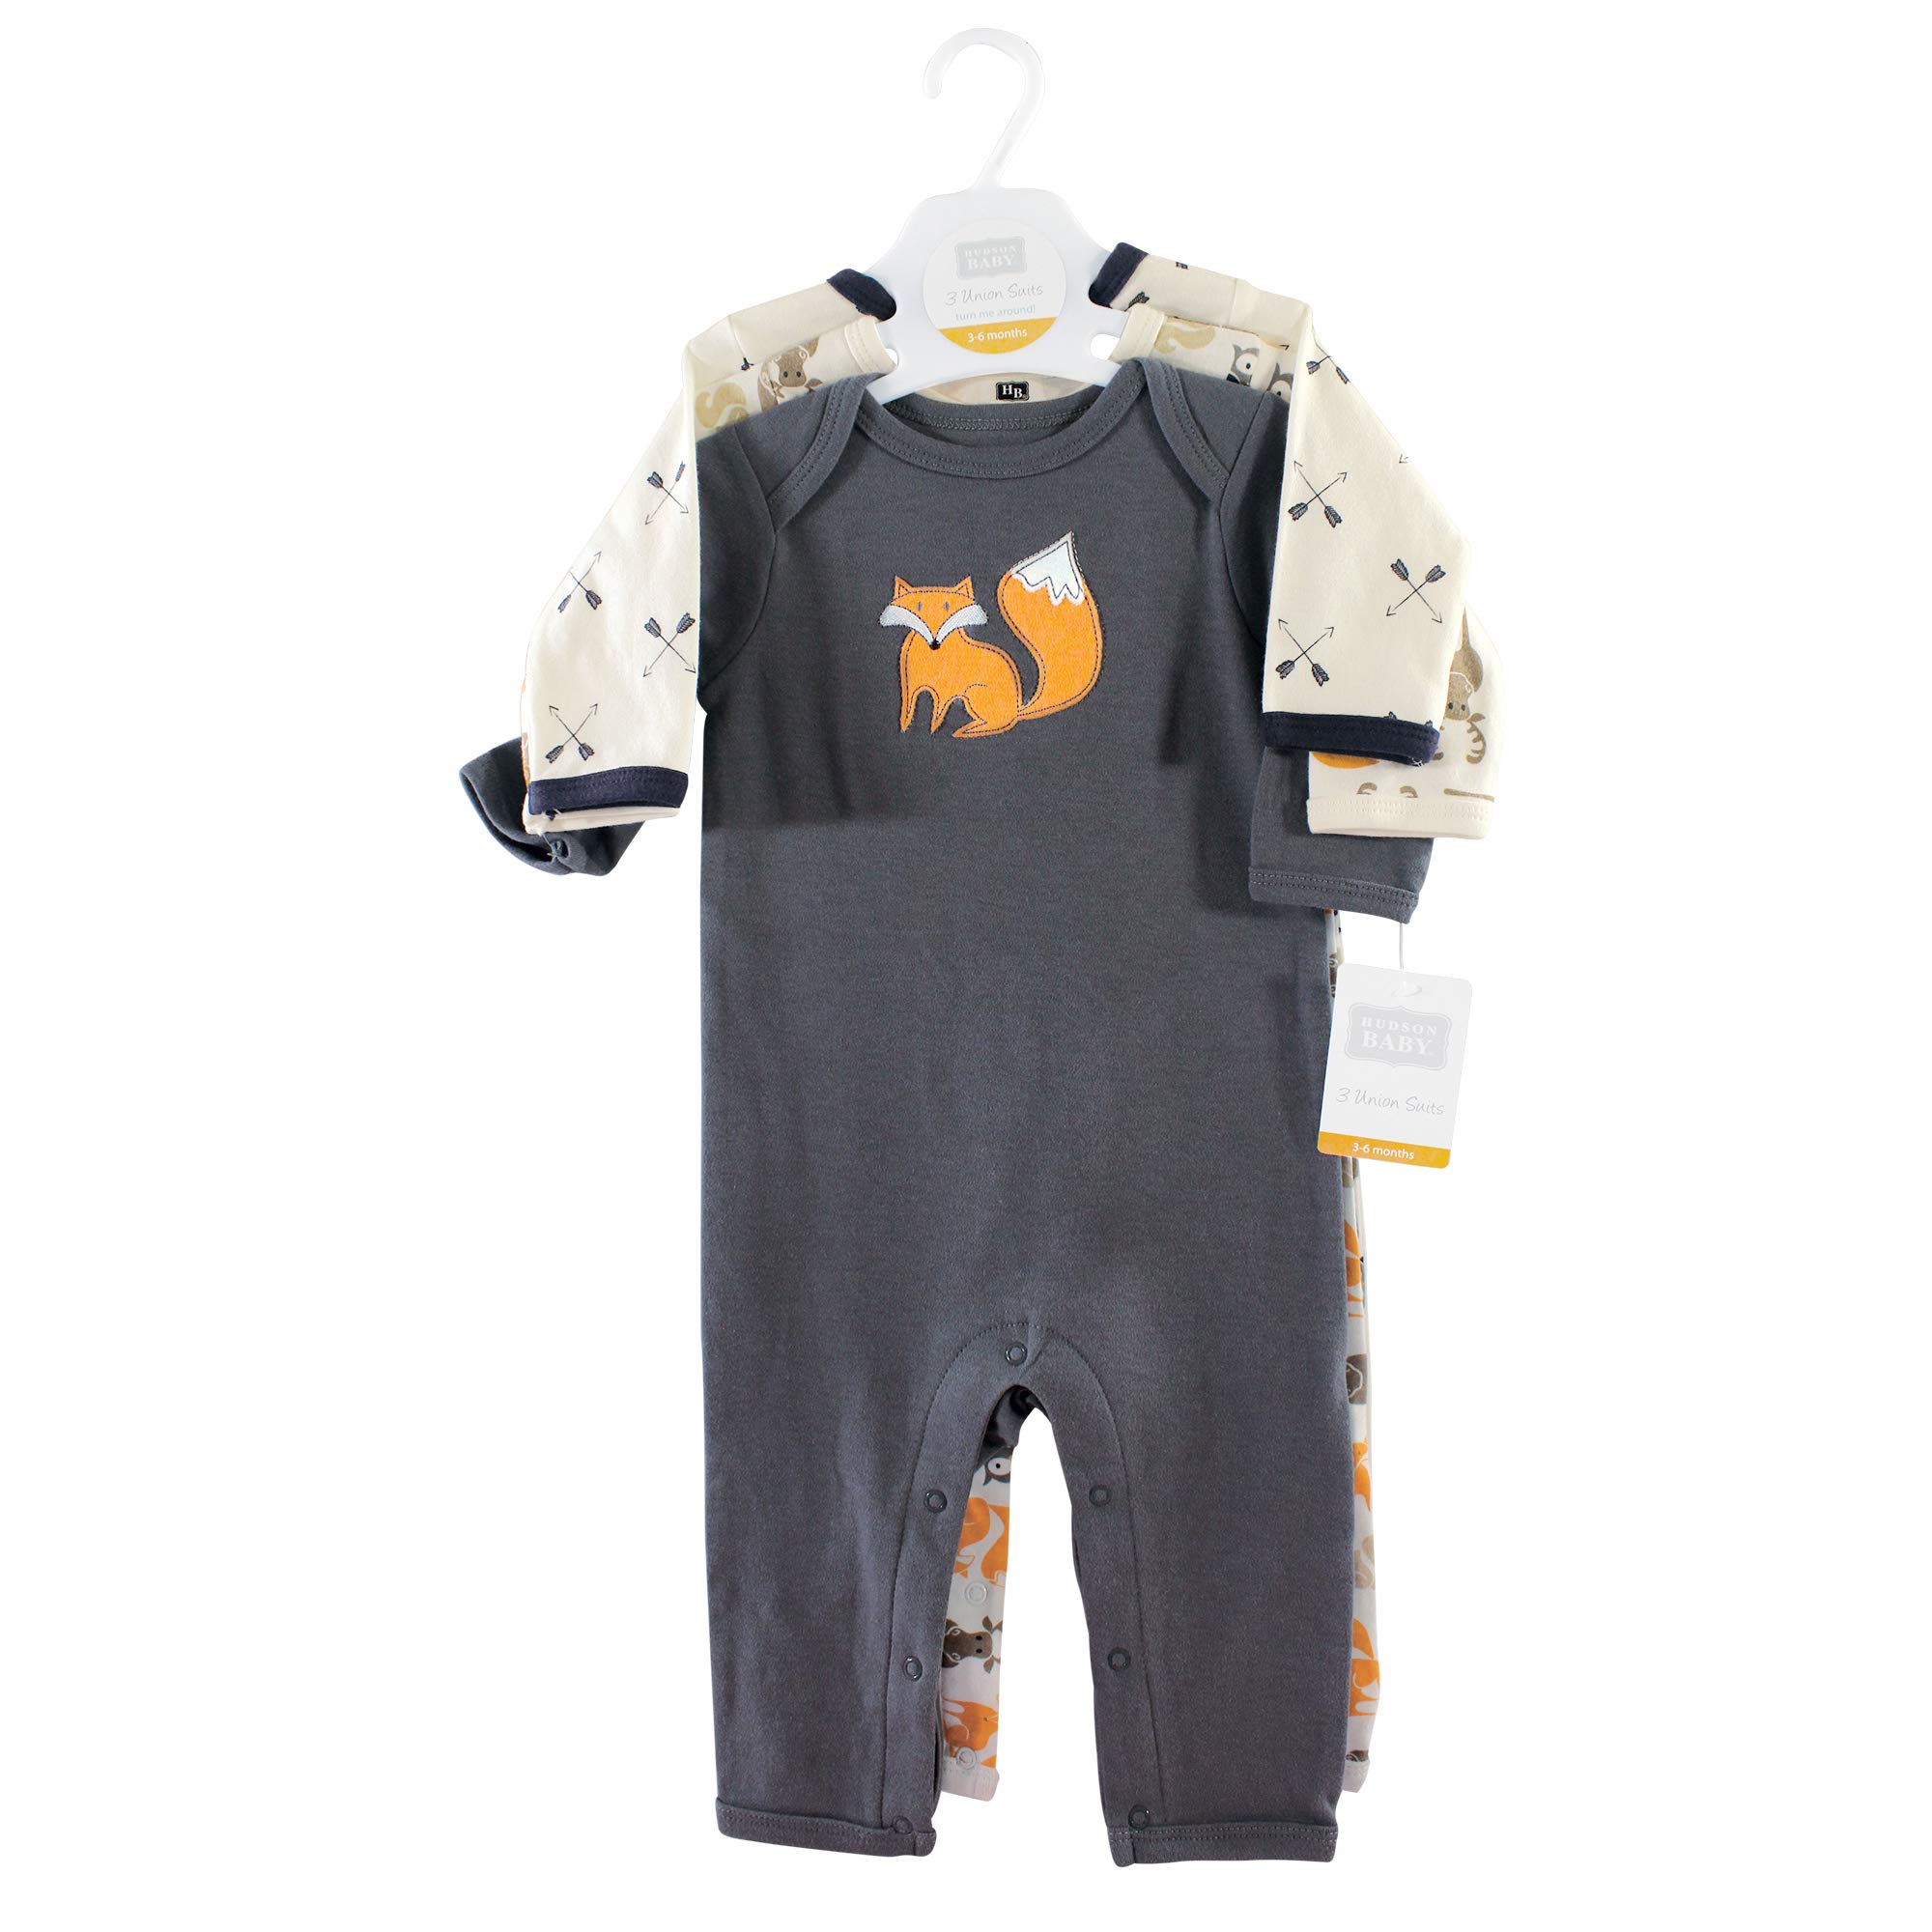 Hudson Baby baby-boys Cotton Coveralls